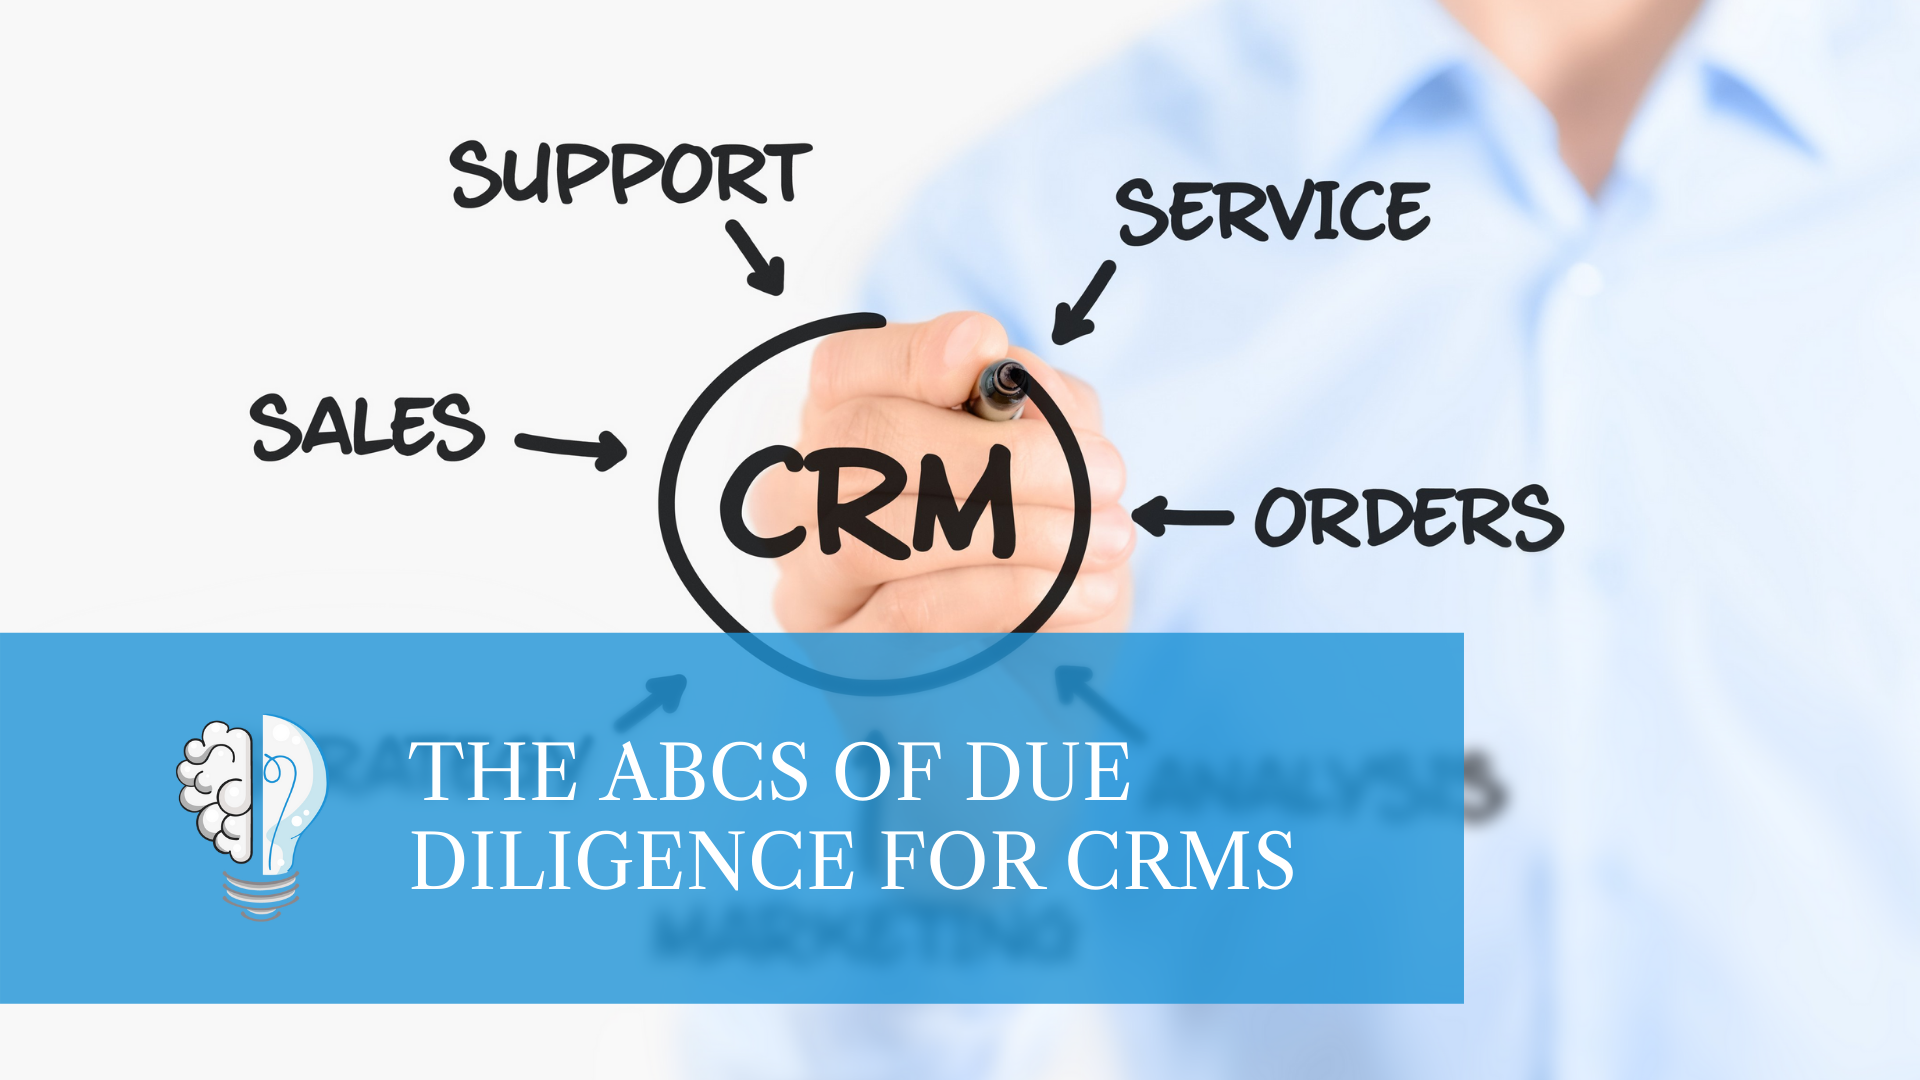 The ABCs of Due Diligence for CRMs